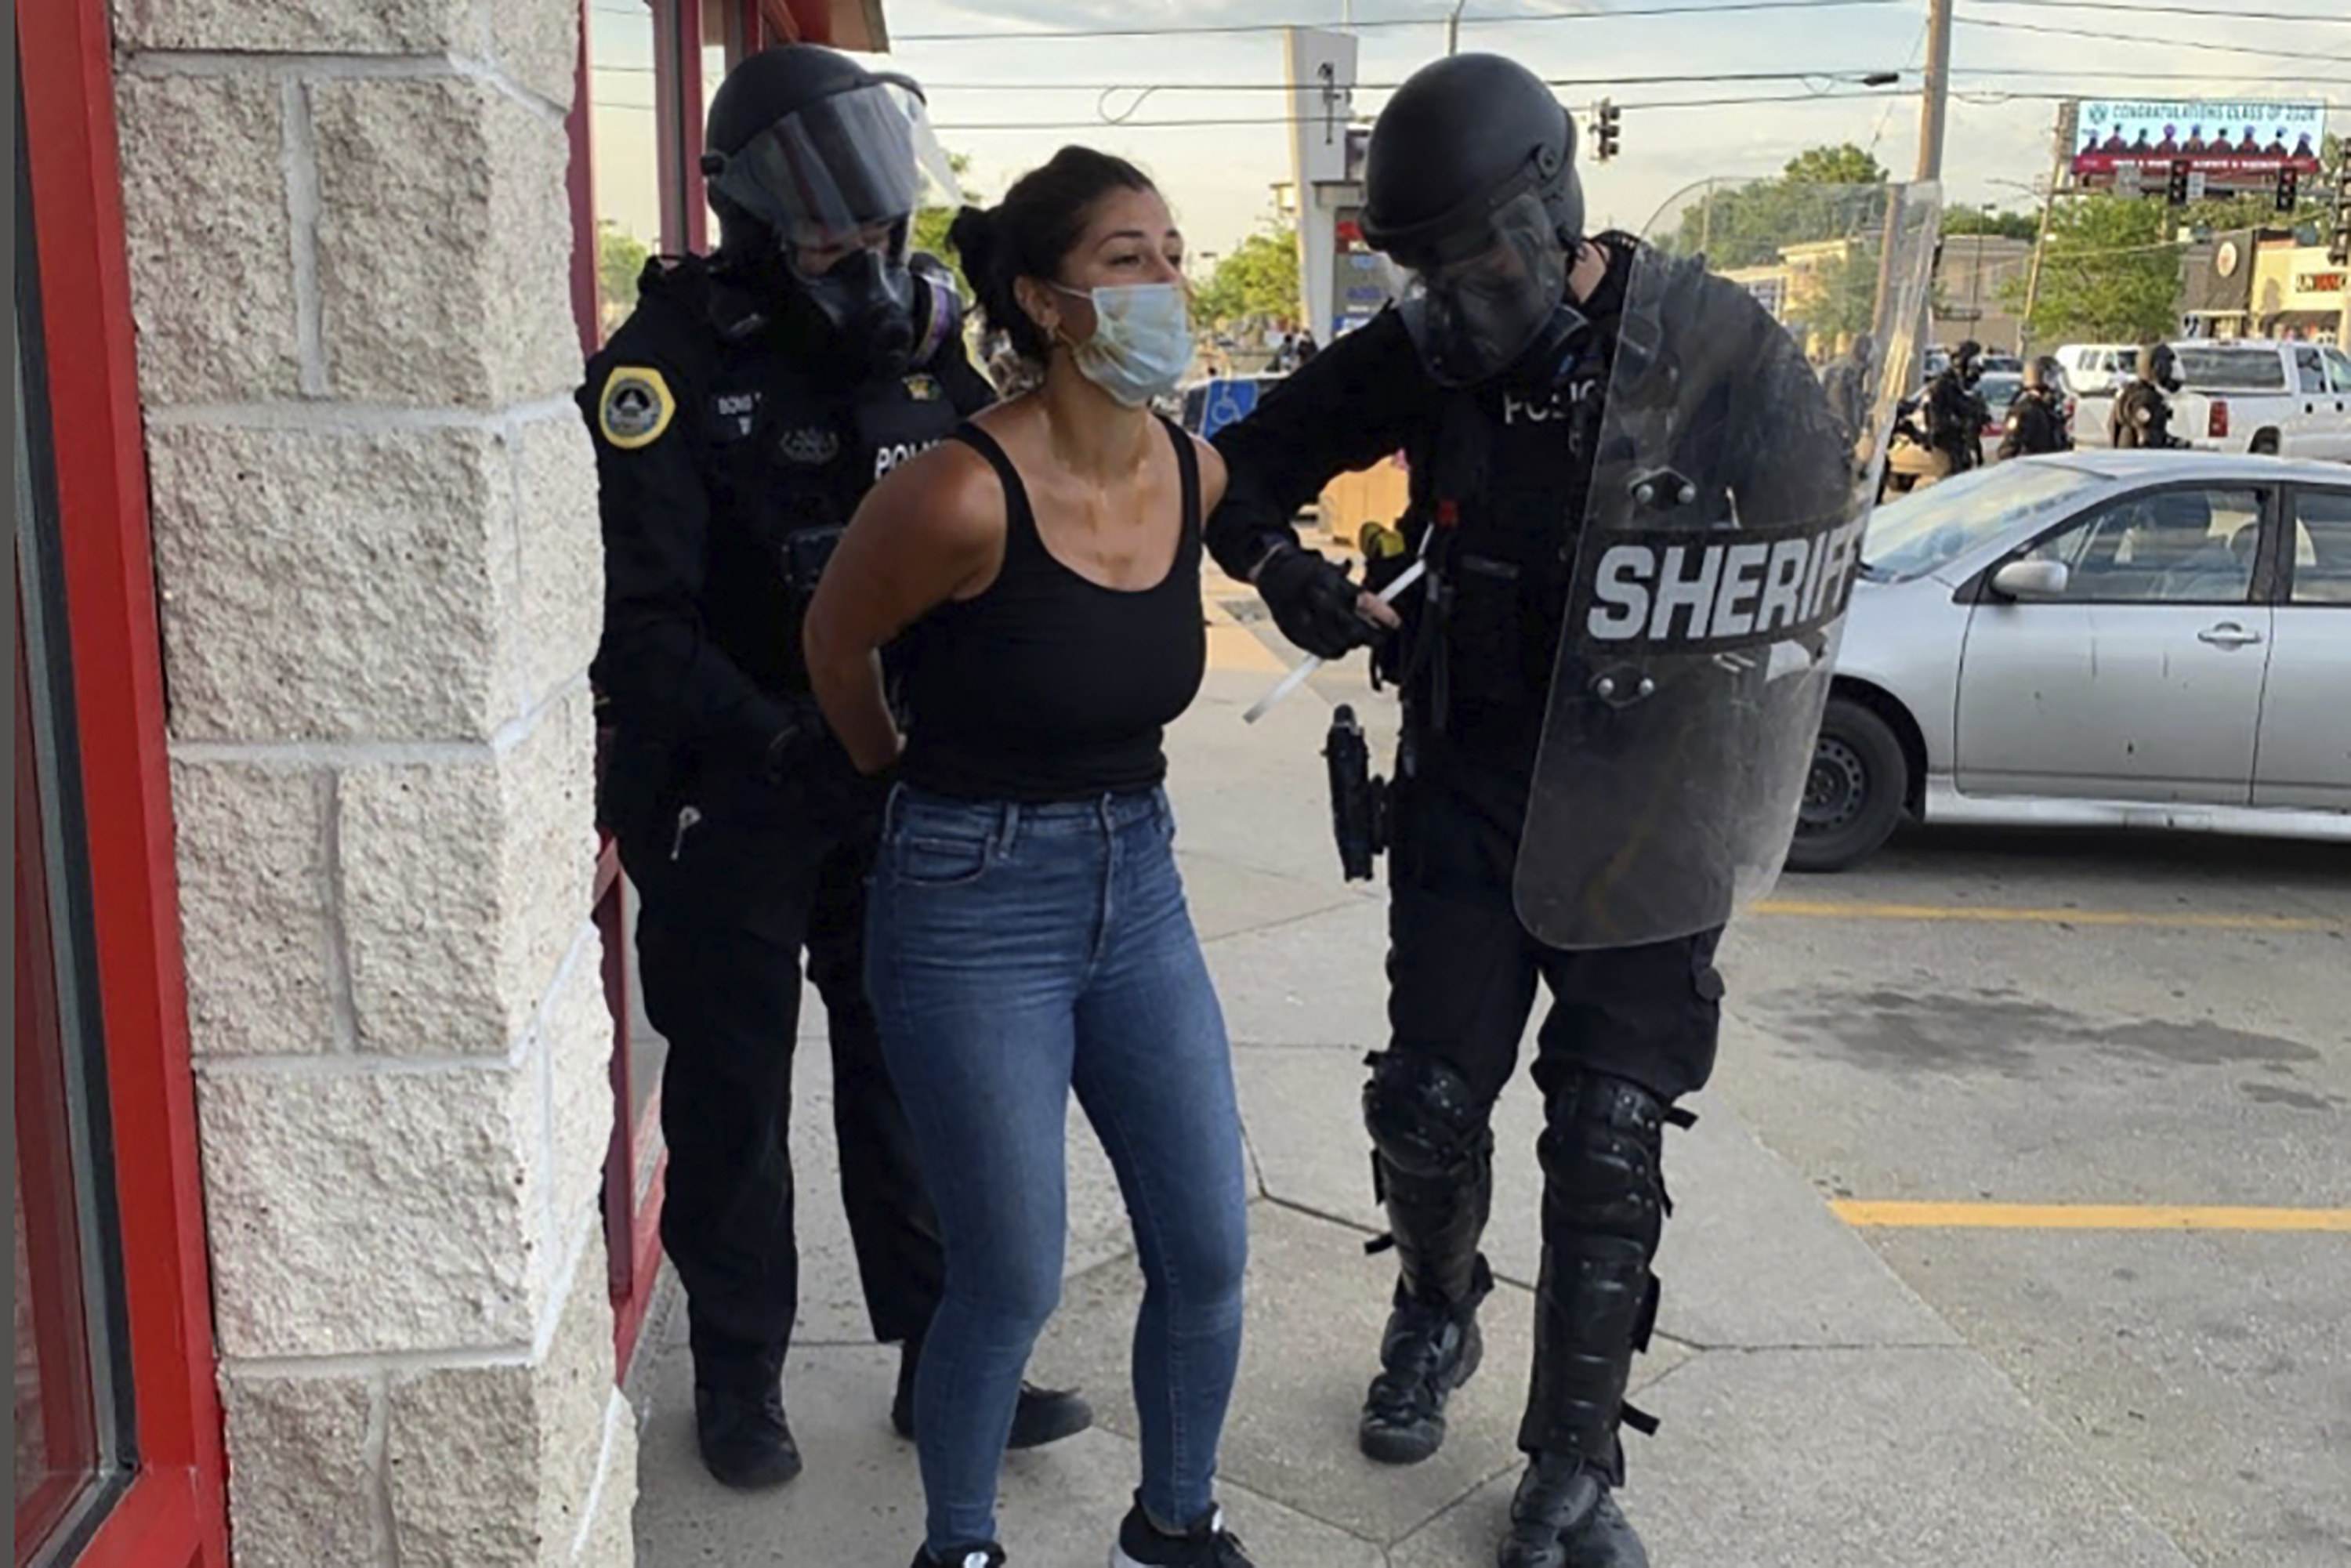 A woman wears a face mask and has her hands behind her back as she is arrested by police officers in armor and gas masks